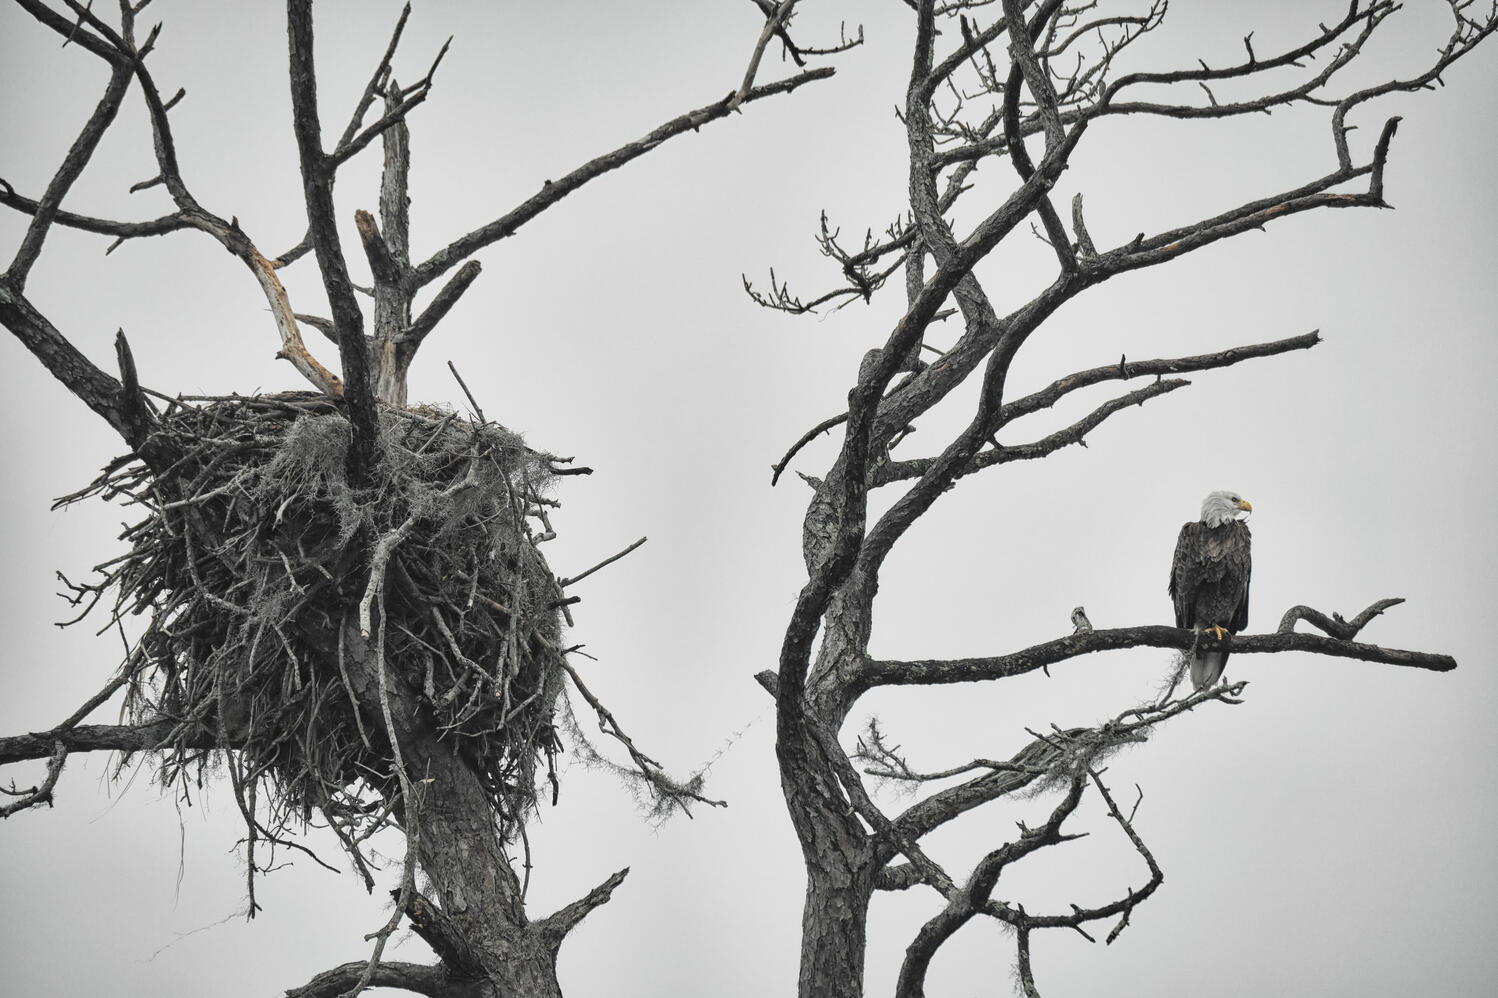 A leaf-less tree takes up most of the image. On the left, a large nest. On the right, an eagle perches in the tree.